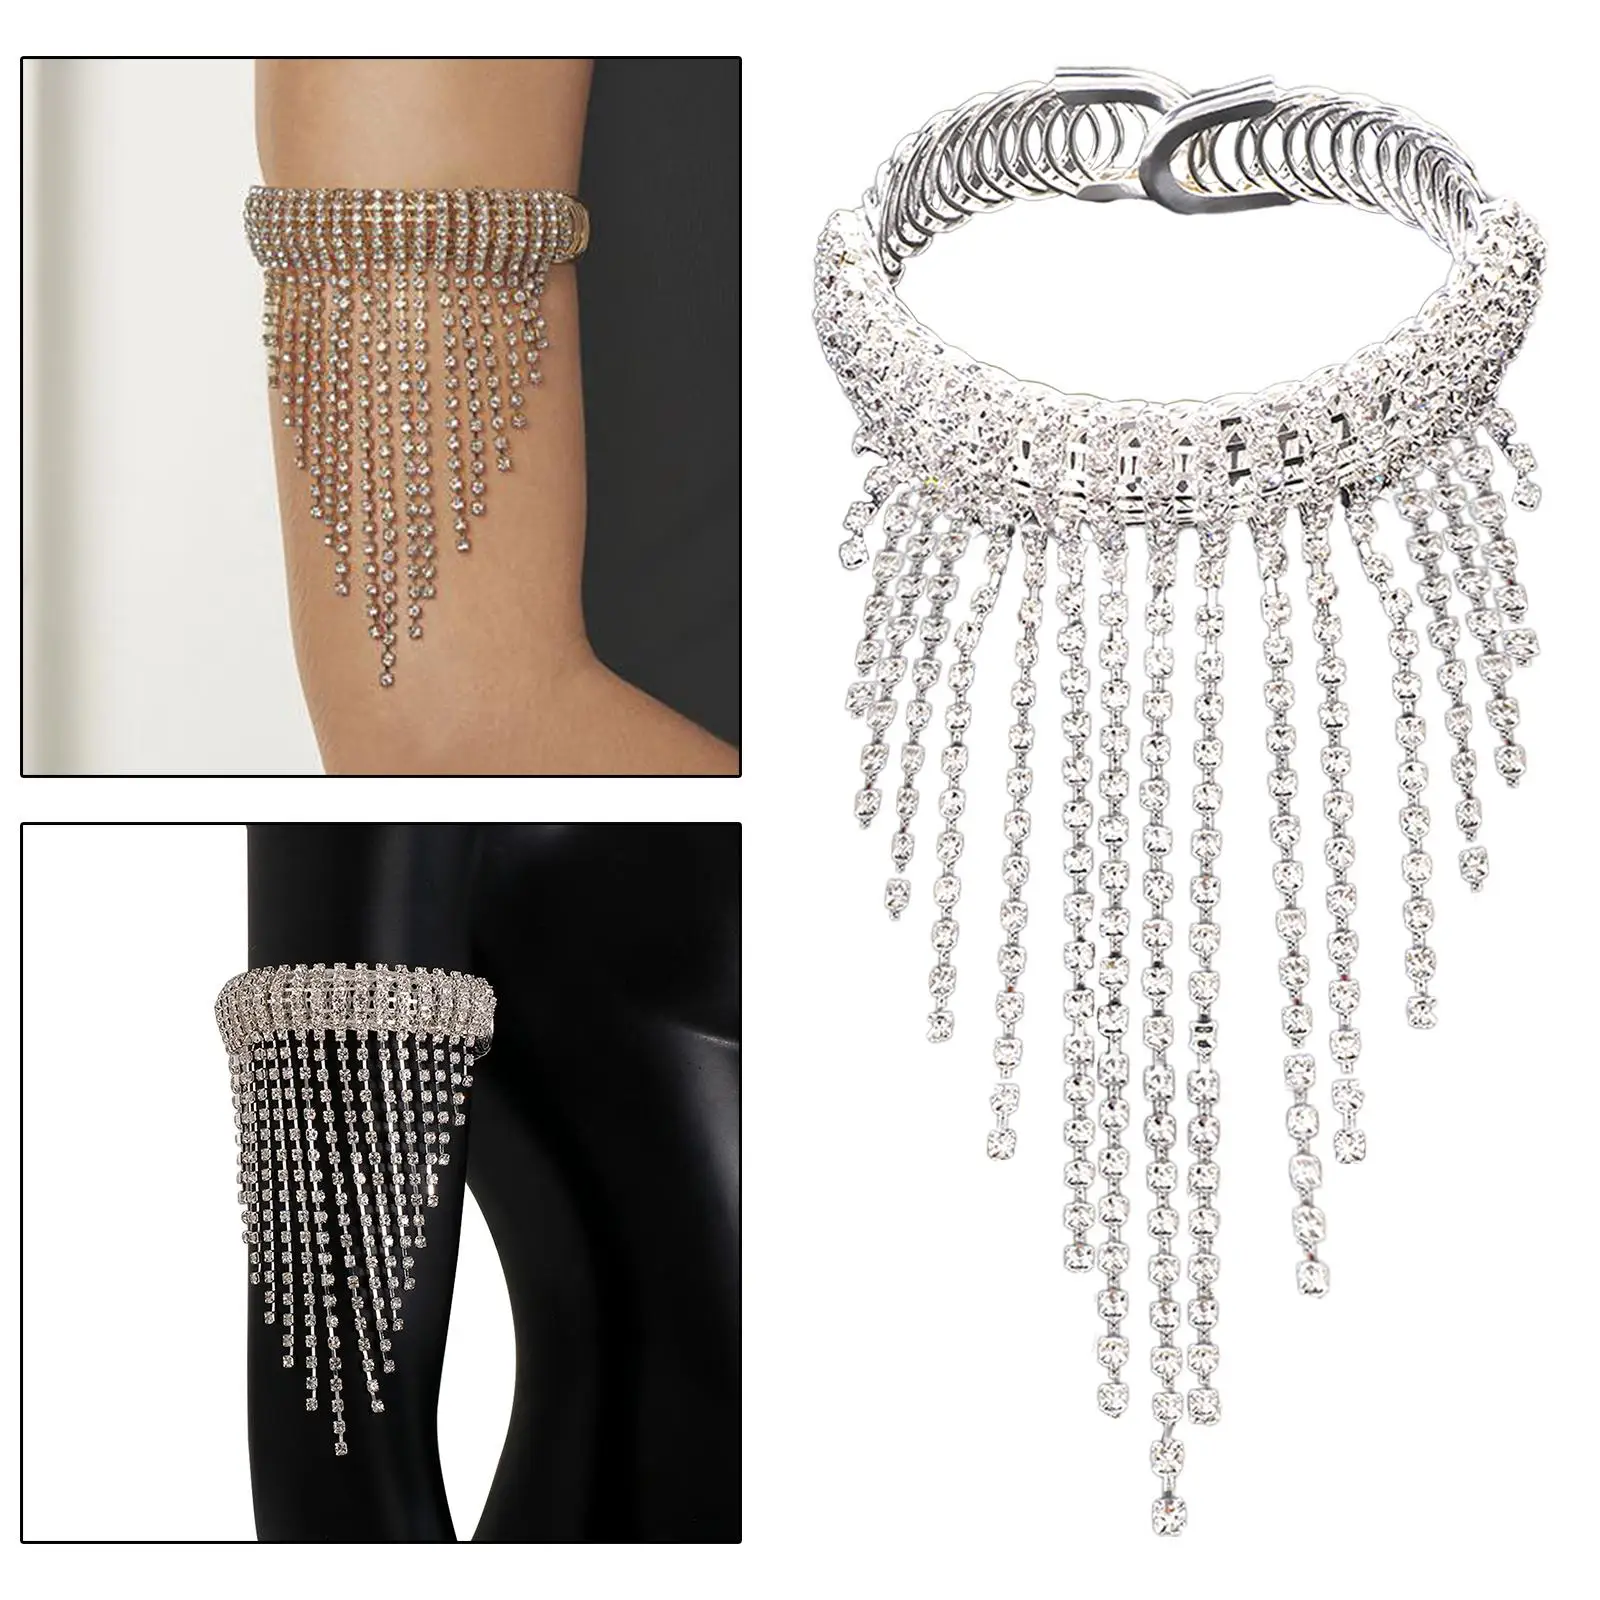 Upper Arm Cuff Bracelet Tassel Chain Rhinestone Costume Accessories Silver Arm Bangle Jewelry Body Chain for Holiday Party